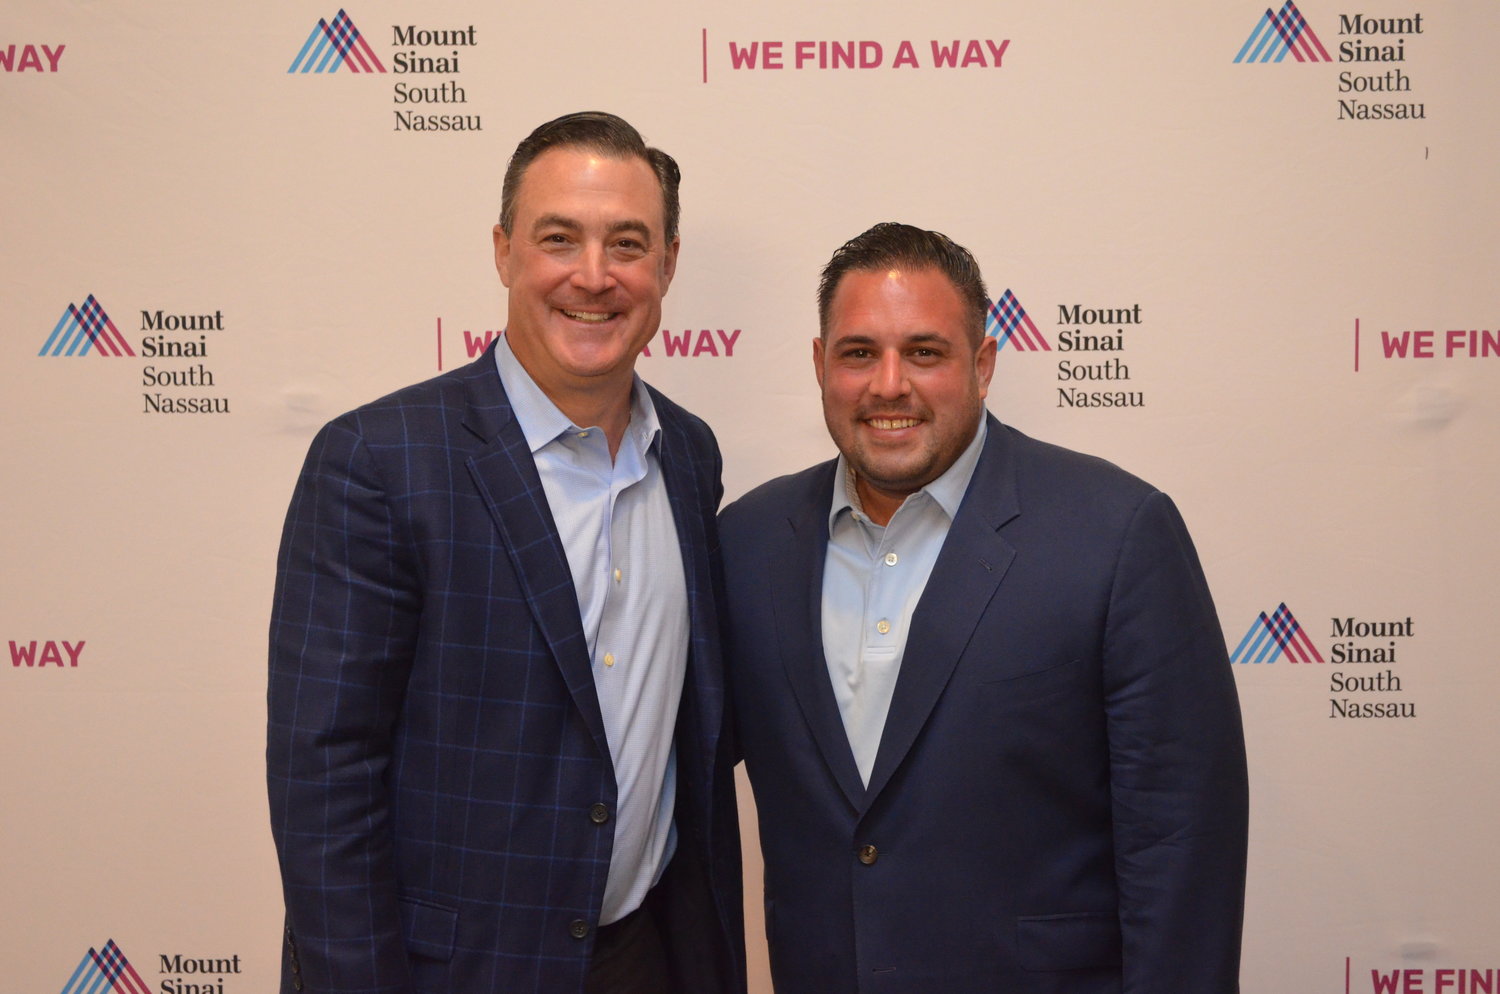 Rockville Centre resident and NFL Deputy General Counsel Larry Ferazani (left) and Town of Hempstead Councilman Anthony D’Esposito (right) were each honored after the 38th annual golf outing and fundraiser on May 16.